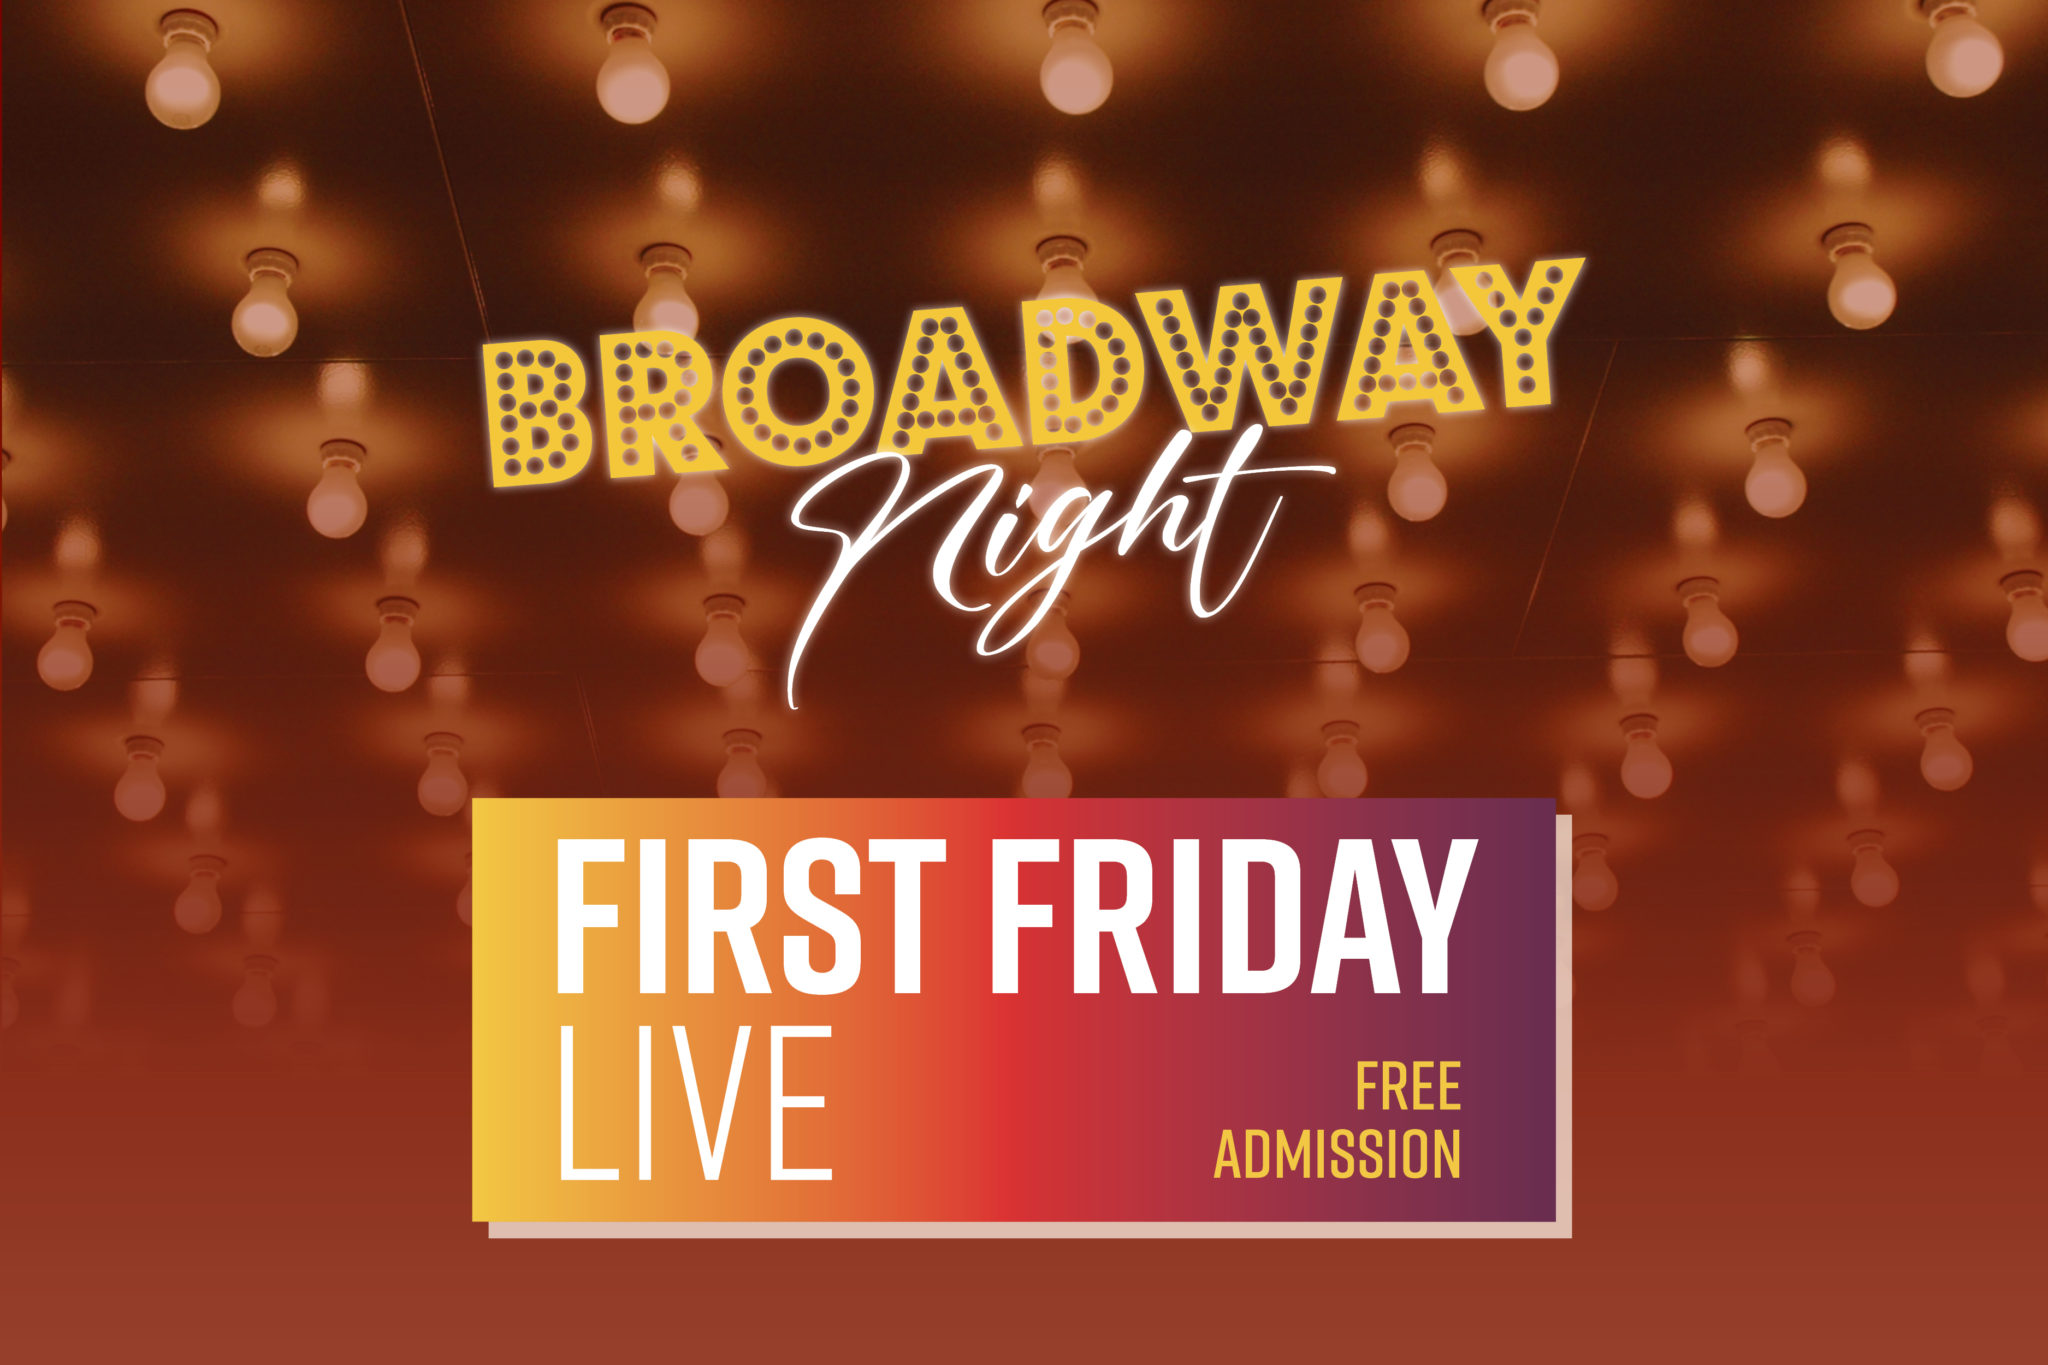 First Friday LIVE: Broadway Night Poster Image